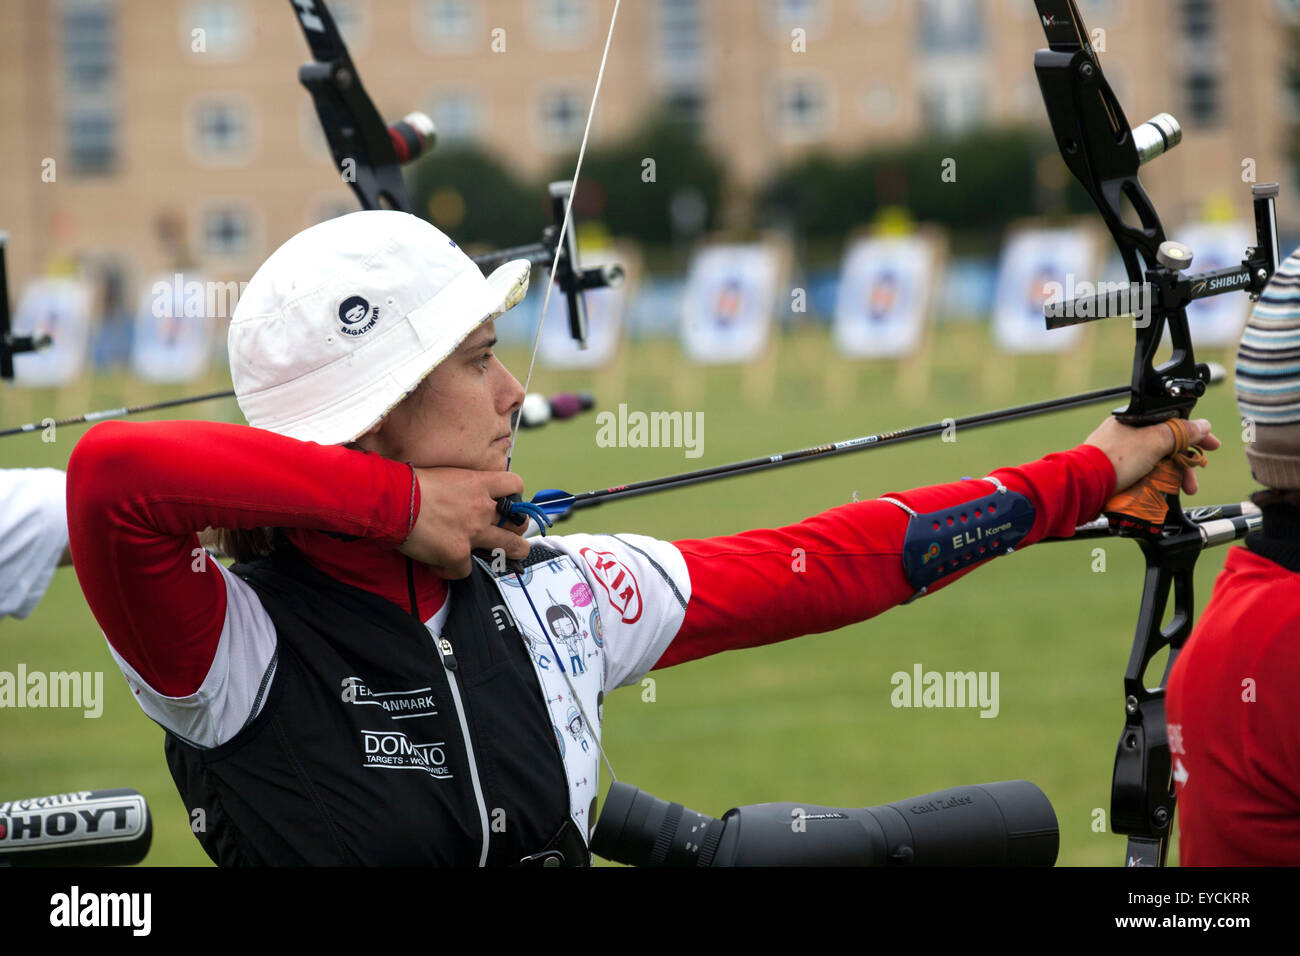 Copenhagen, Denmark, July 27th, 2015. Danish archer Maja Jager takes aim for her shoot in the qualifying round in recurve bow at the World Archery Championships in Copenhagen Credit:  OJPHOTOS/Alamy Live News Stock Photo